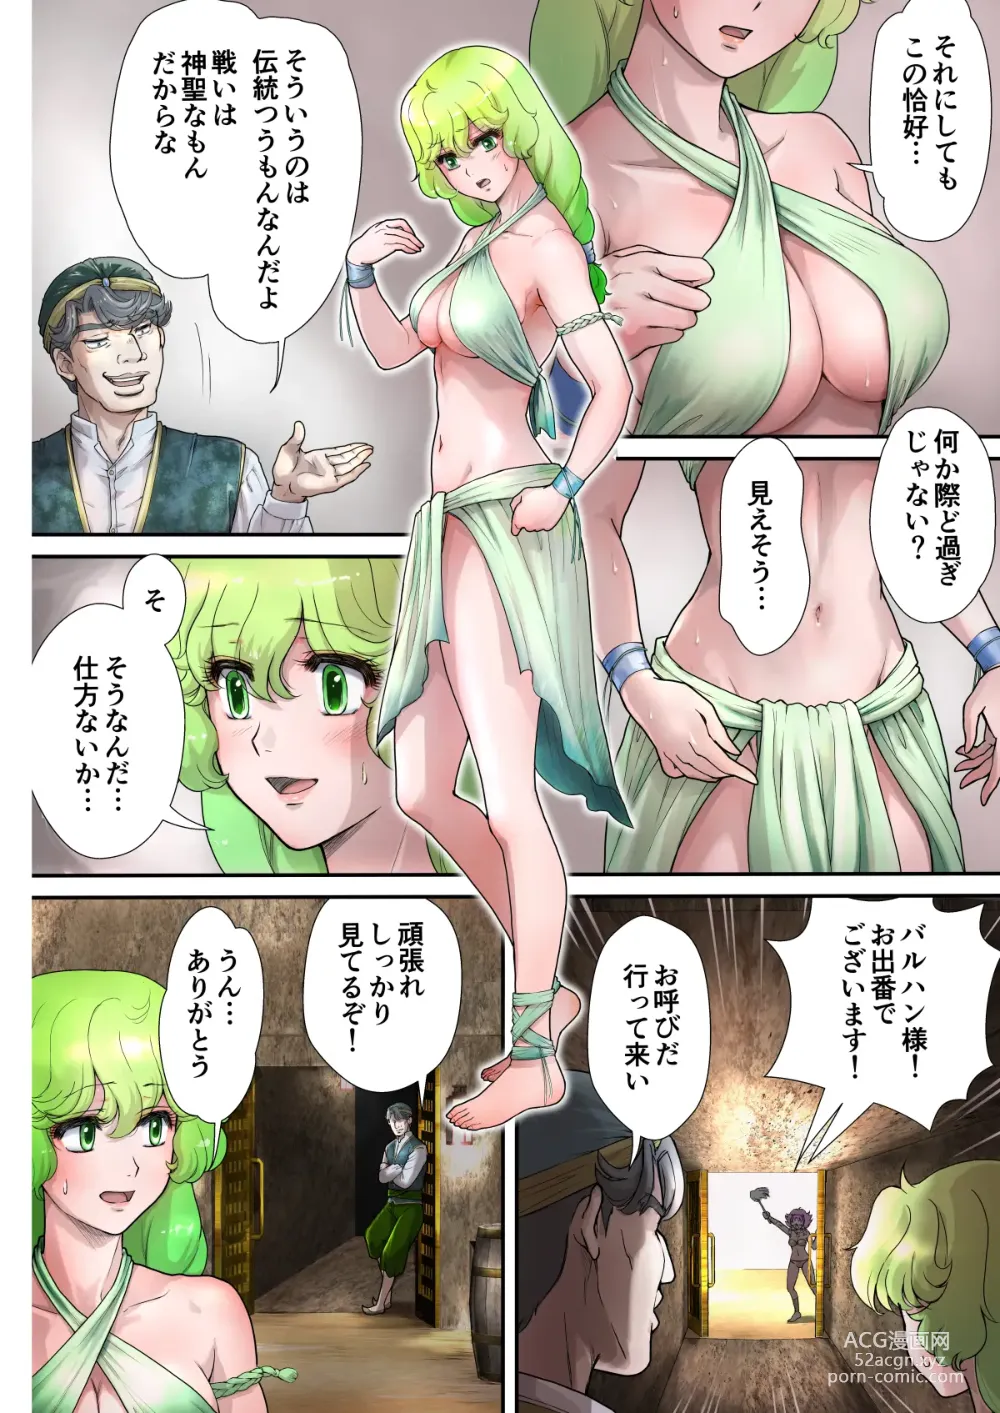 Page 5 of doujinshi Cat Fighter  Mimia